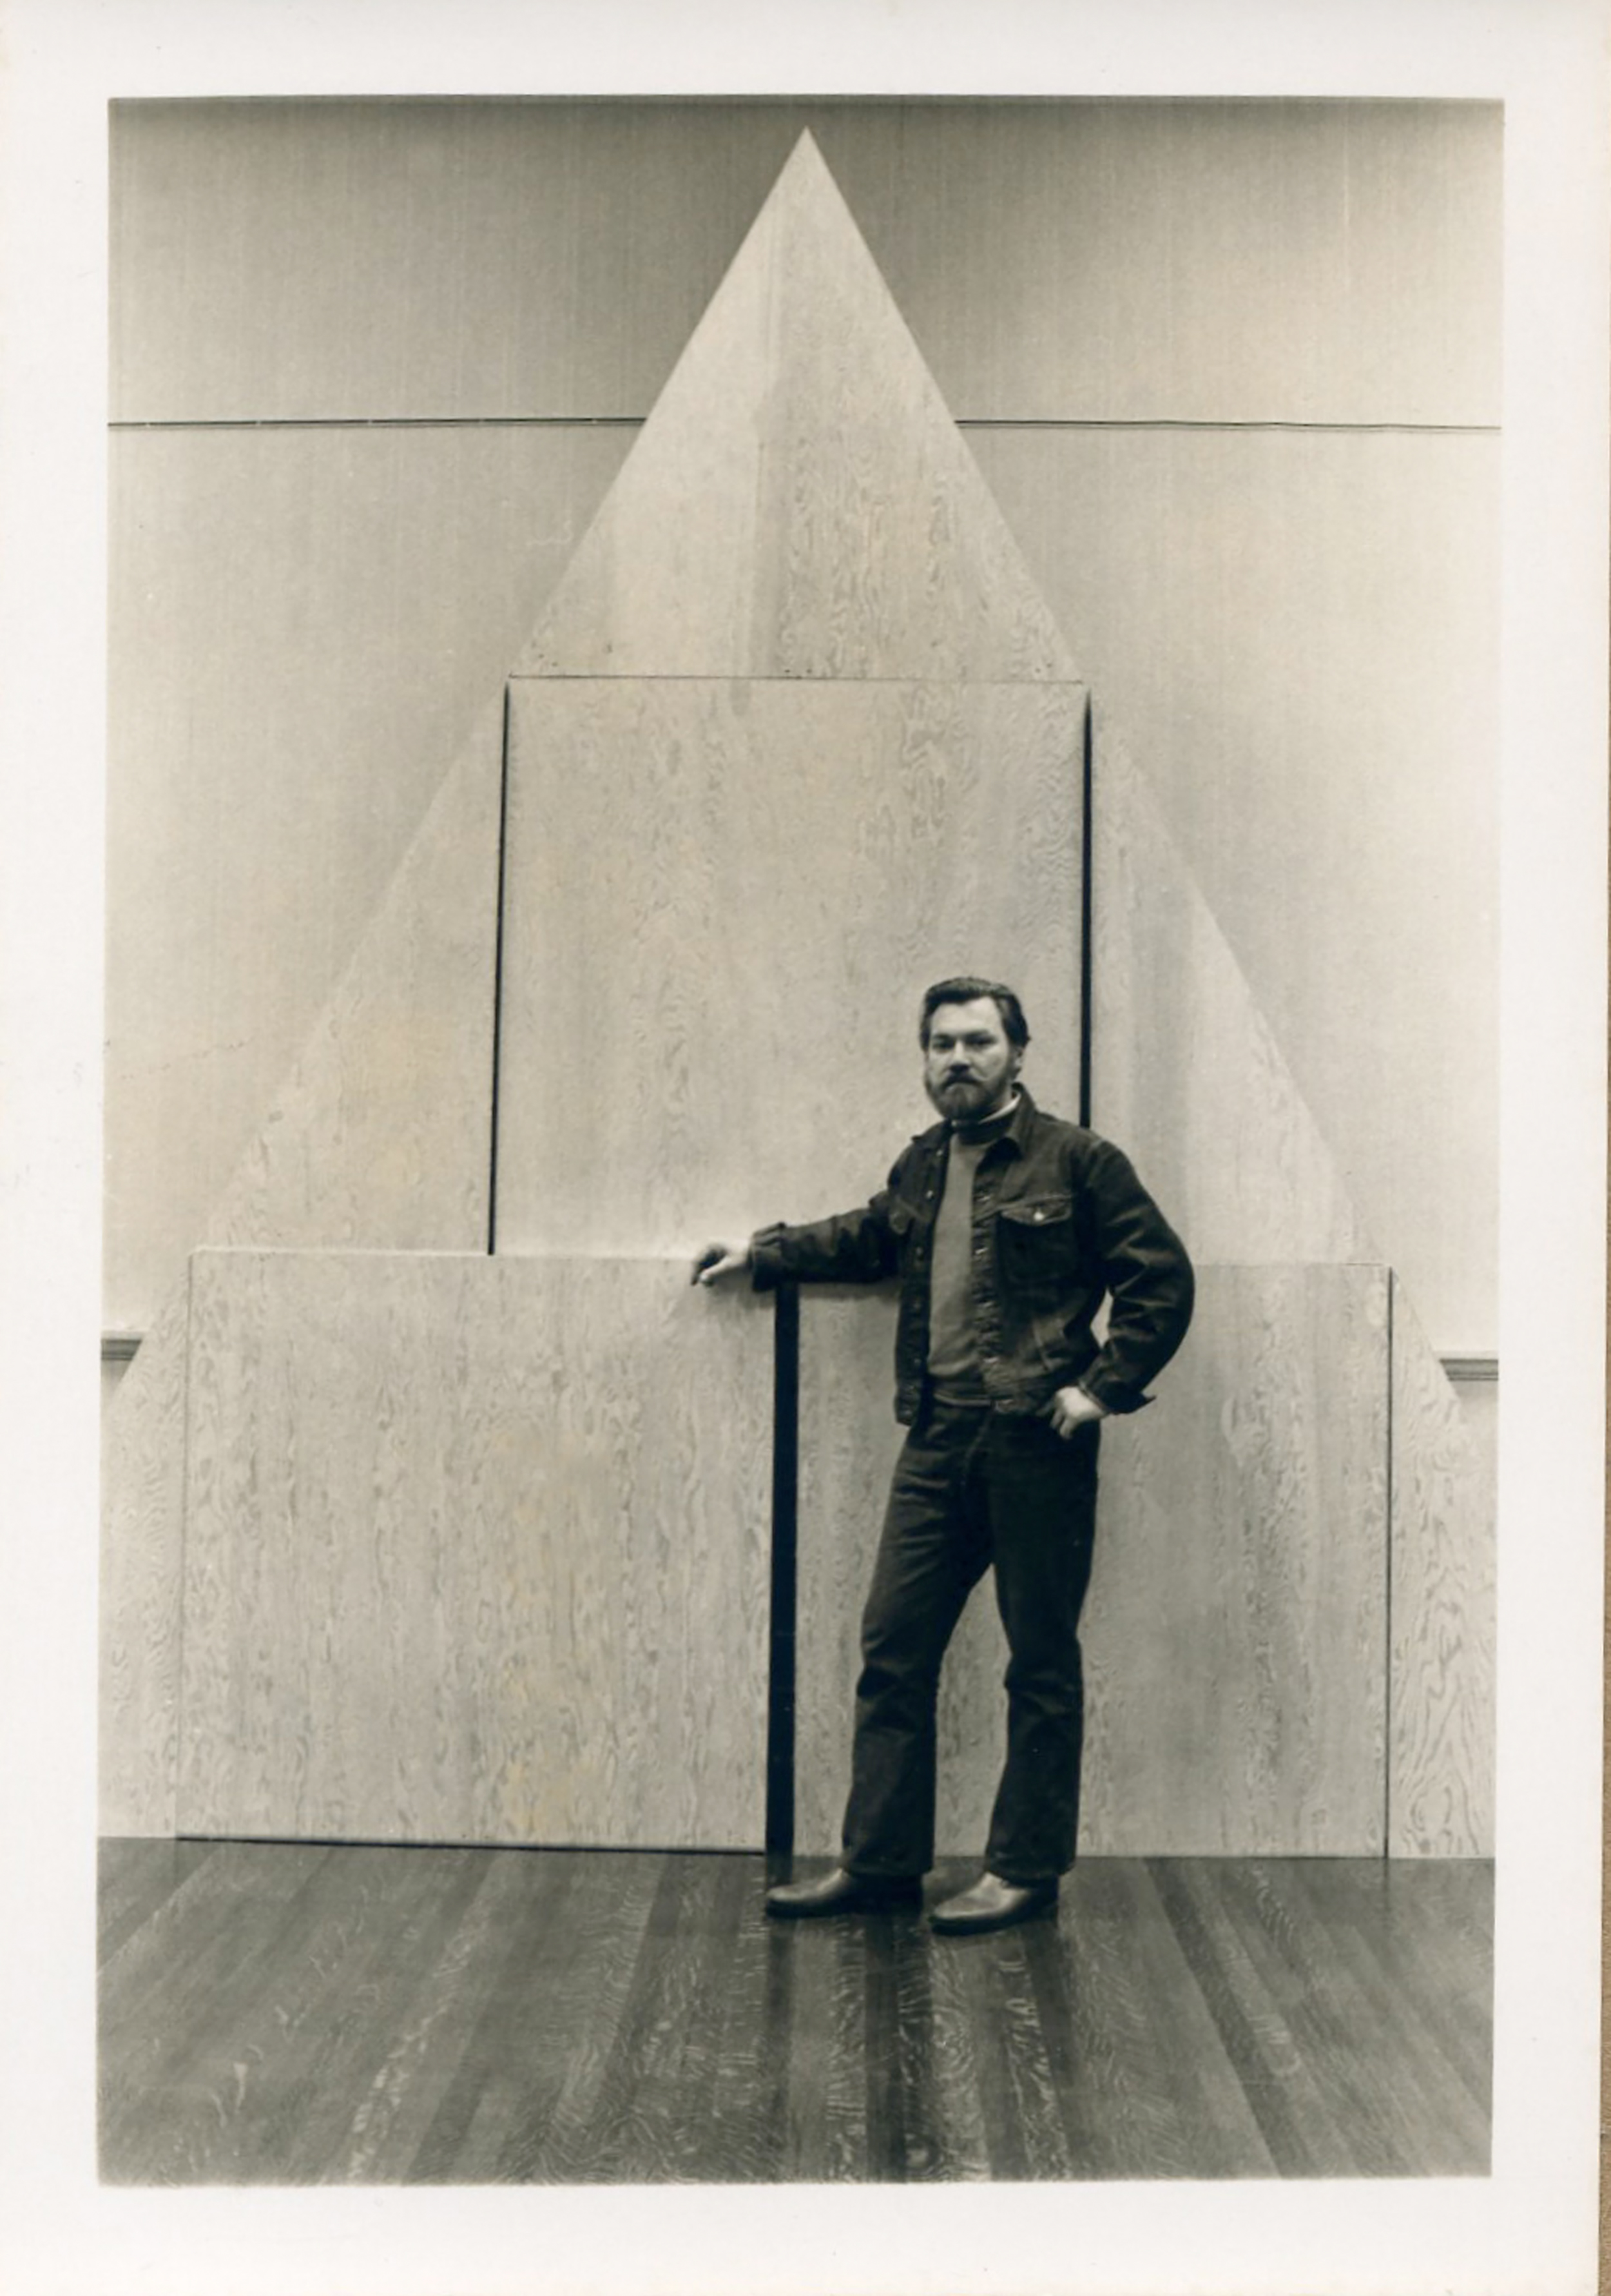   JU with his monolithic plywood sculptures on exhibition at the Ann Mary Brown memorial, Brown University,&nbsp;Providence, RI. 1972  